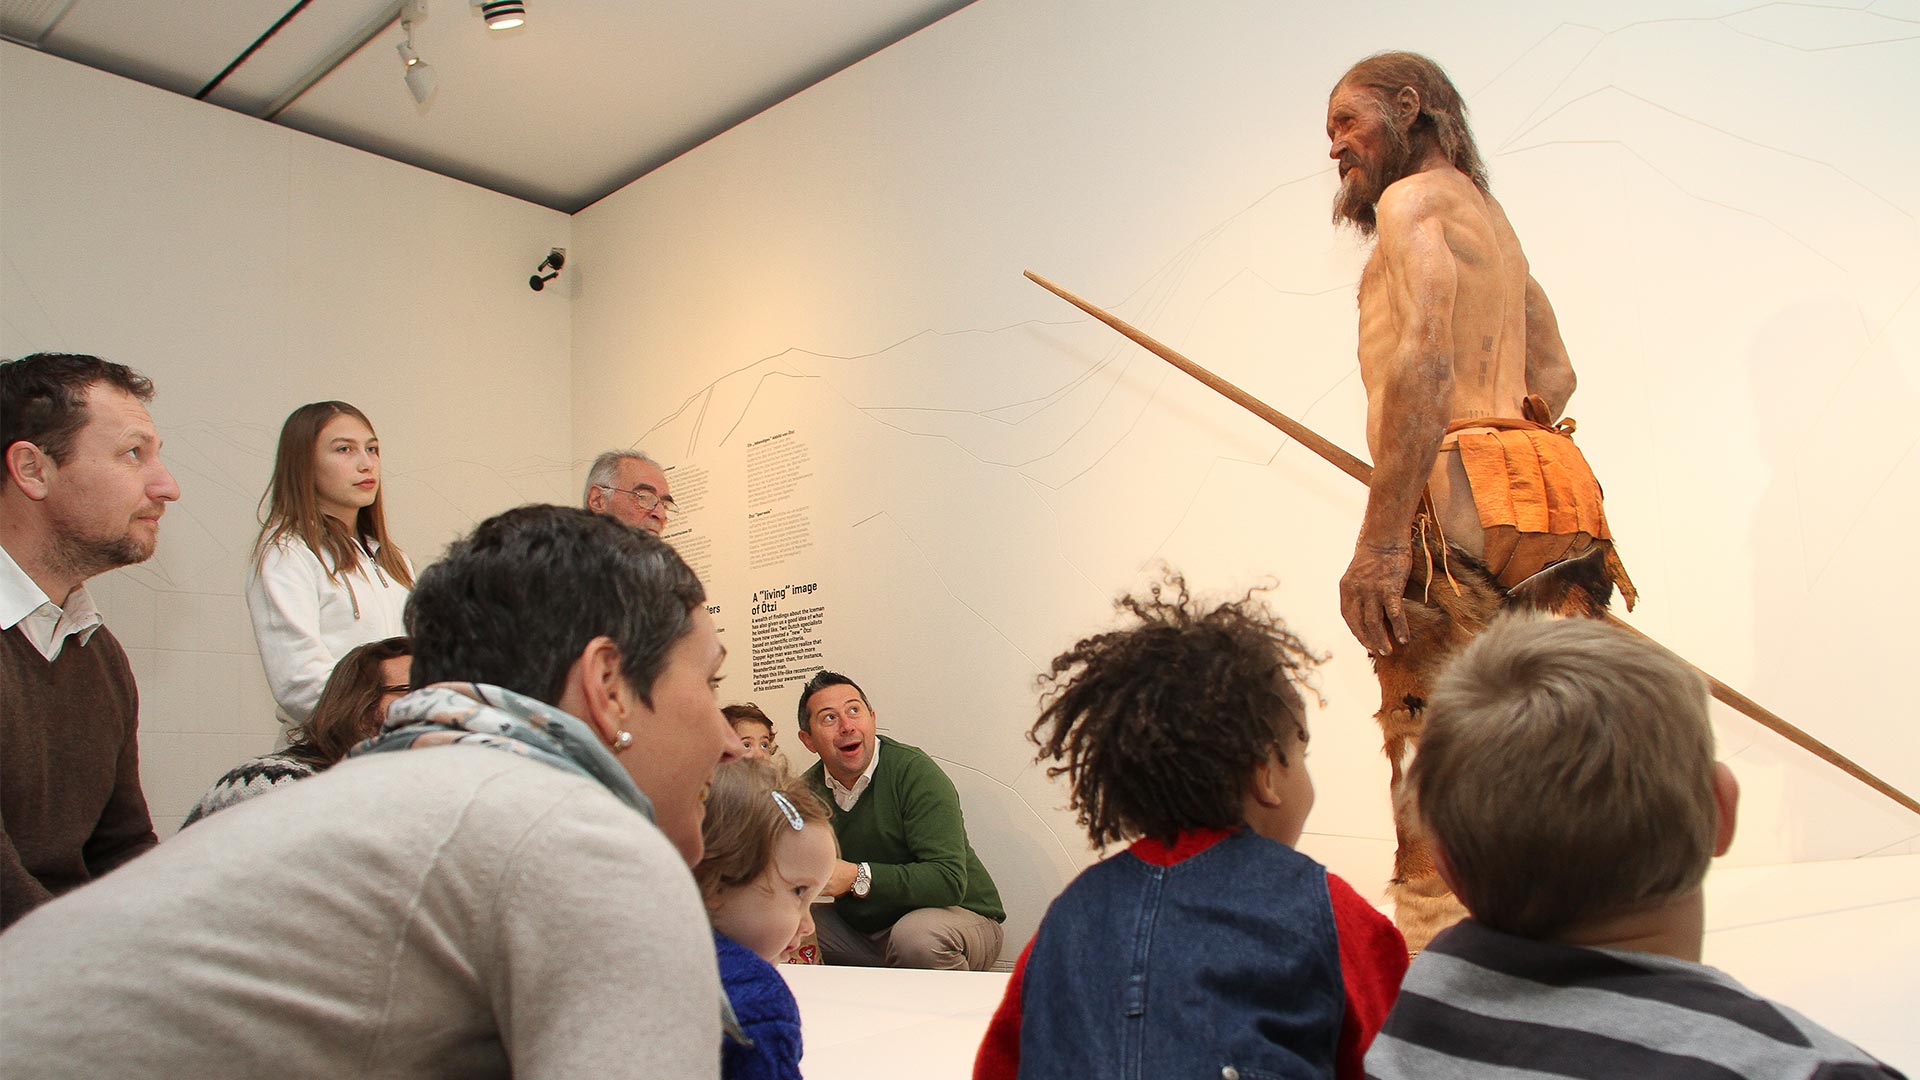 In the Ötzi Museum, families of young and old sit in a circle and admire the life-size replica of the snowman.